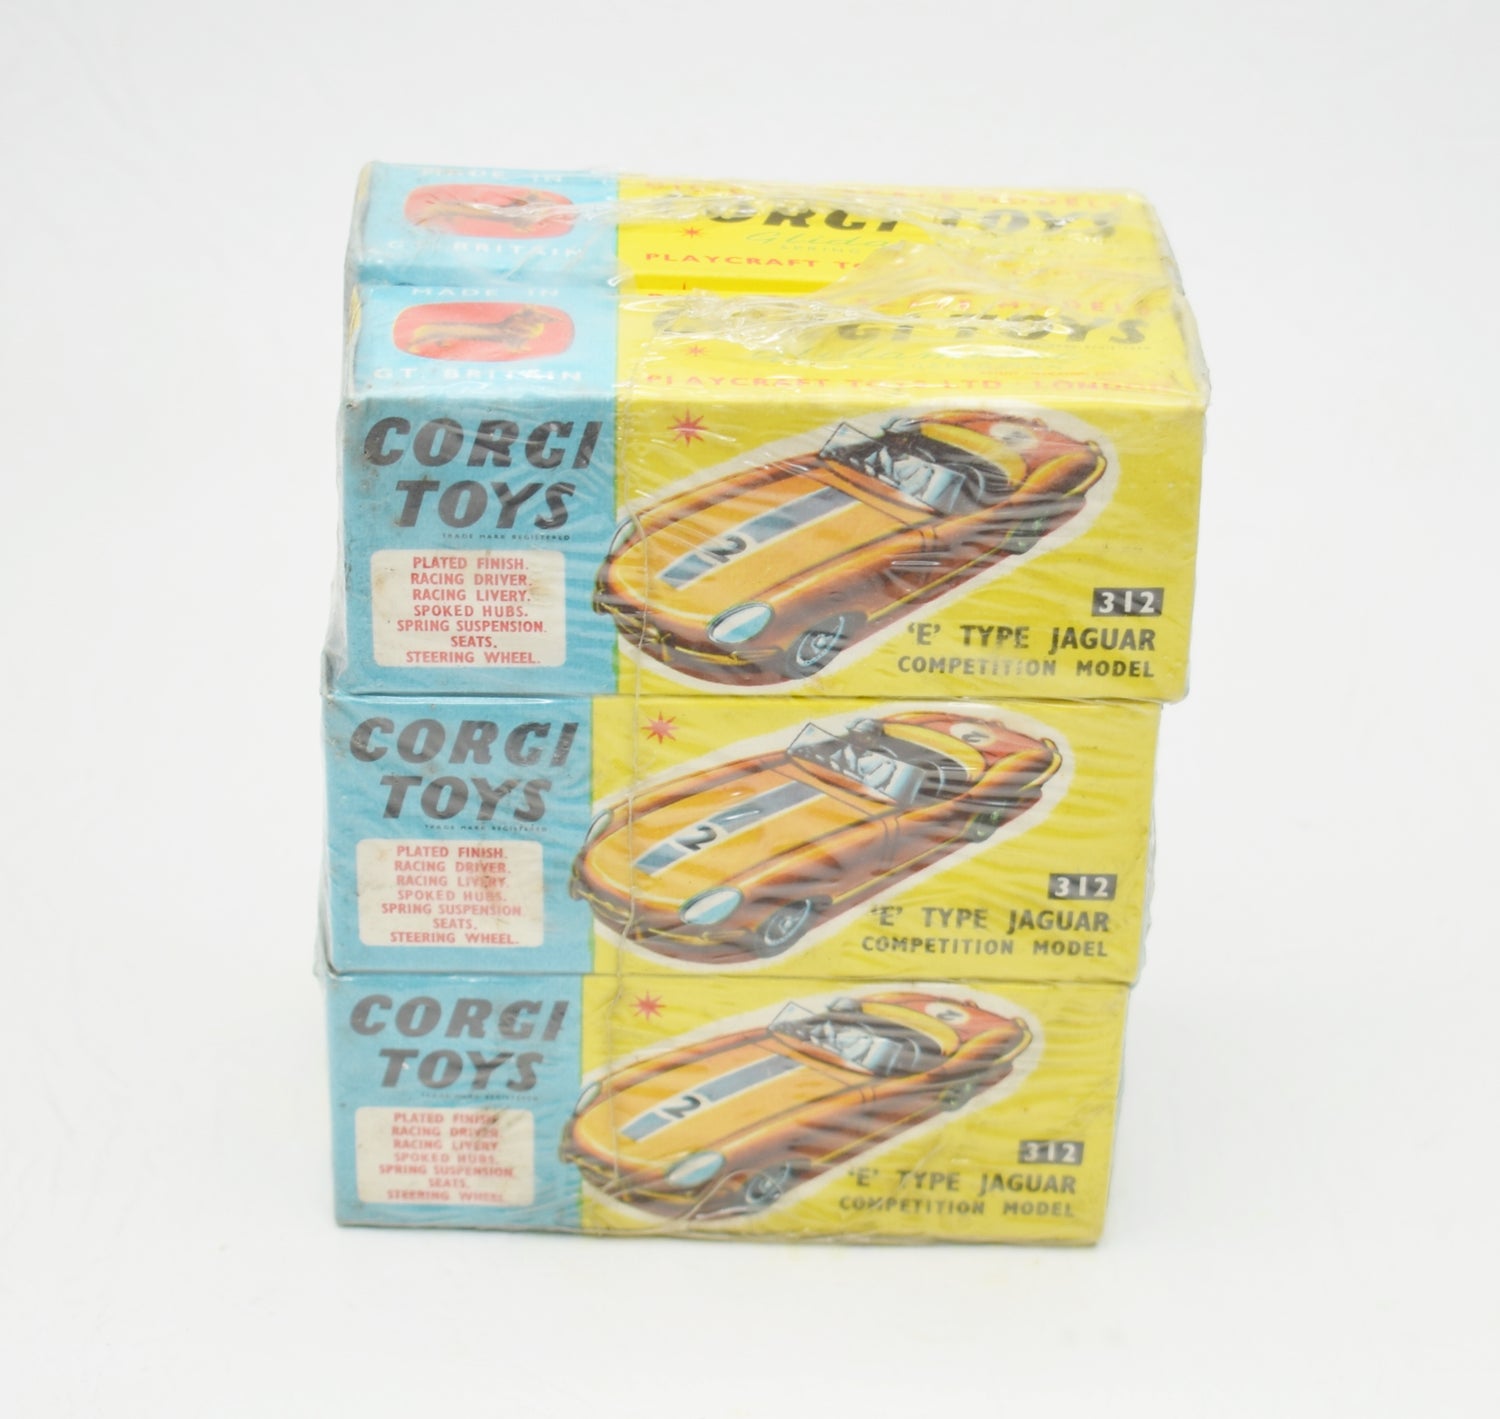 Corgi toys 312 Competition E-type Trade wrap of 6 (Old Shop Stock from Ripon North Yorkshire)